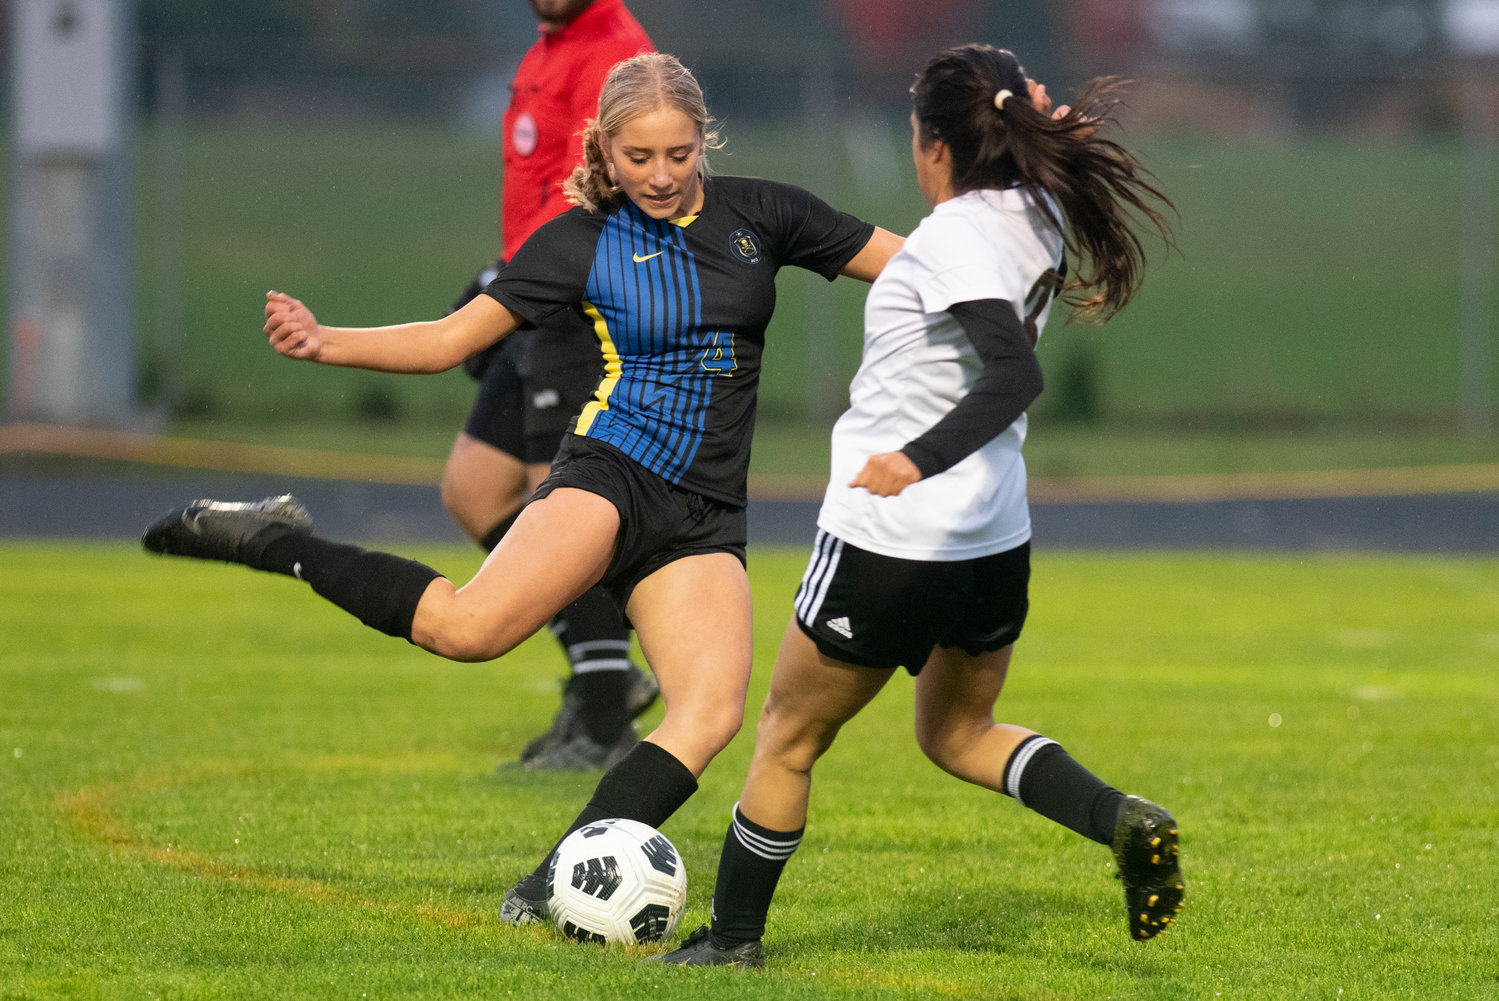 Adna freshman Lydia Tobin (4) boots a pass downfield against Raymond-South Bend on Oct. 13, 2021.